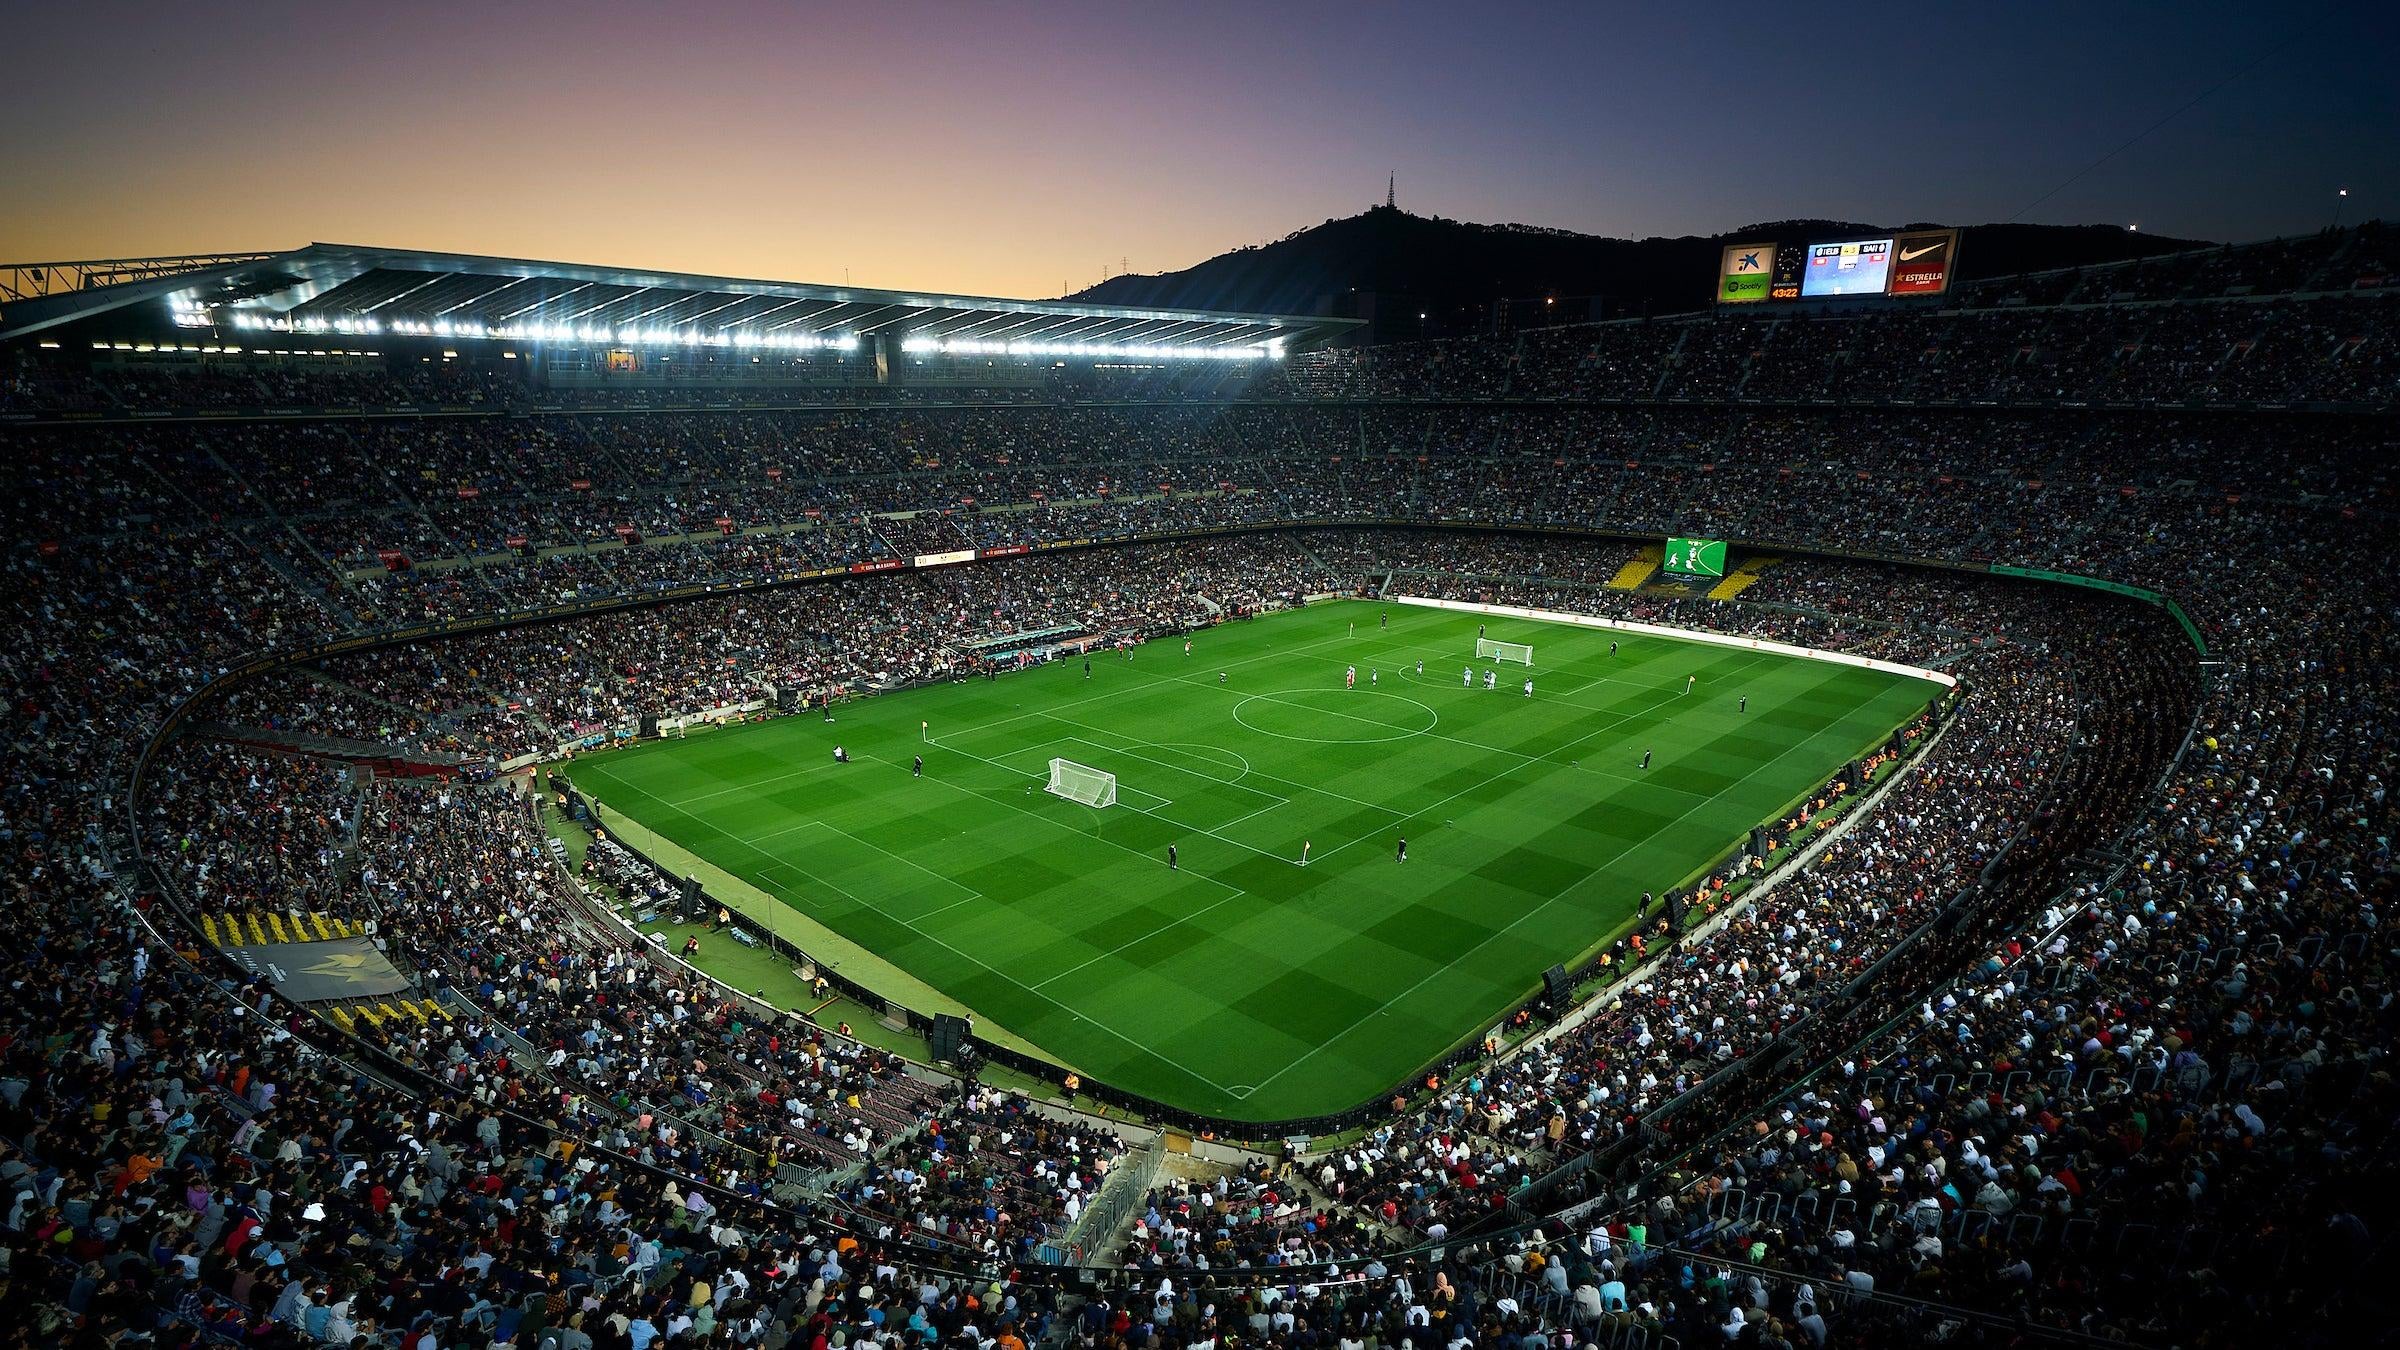 The Kings League Final Four sold out FC Barcelona's Camp Nou stadium. (Photo: Courtesy of the Kings League InfoJobs)